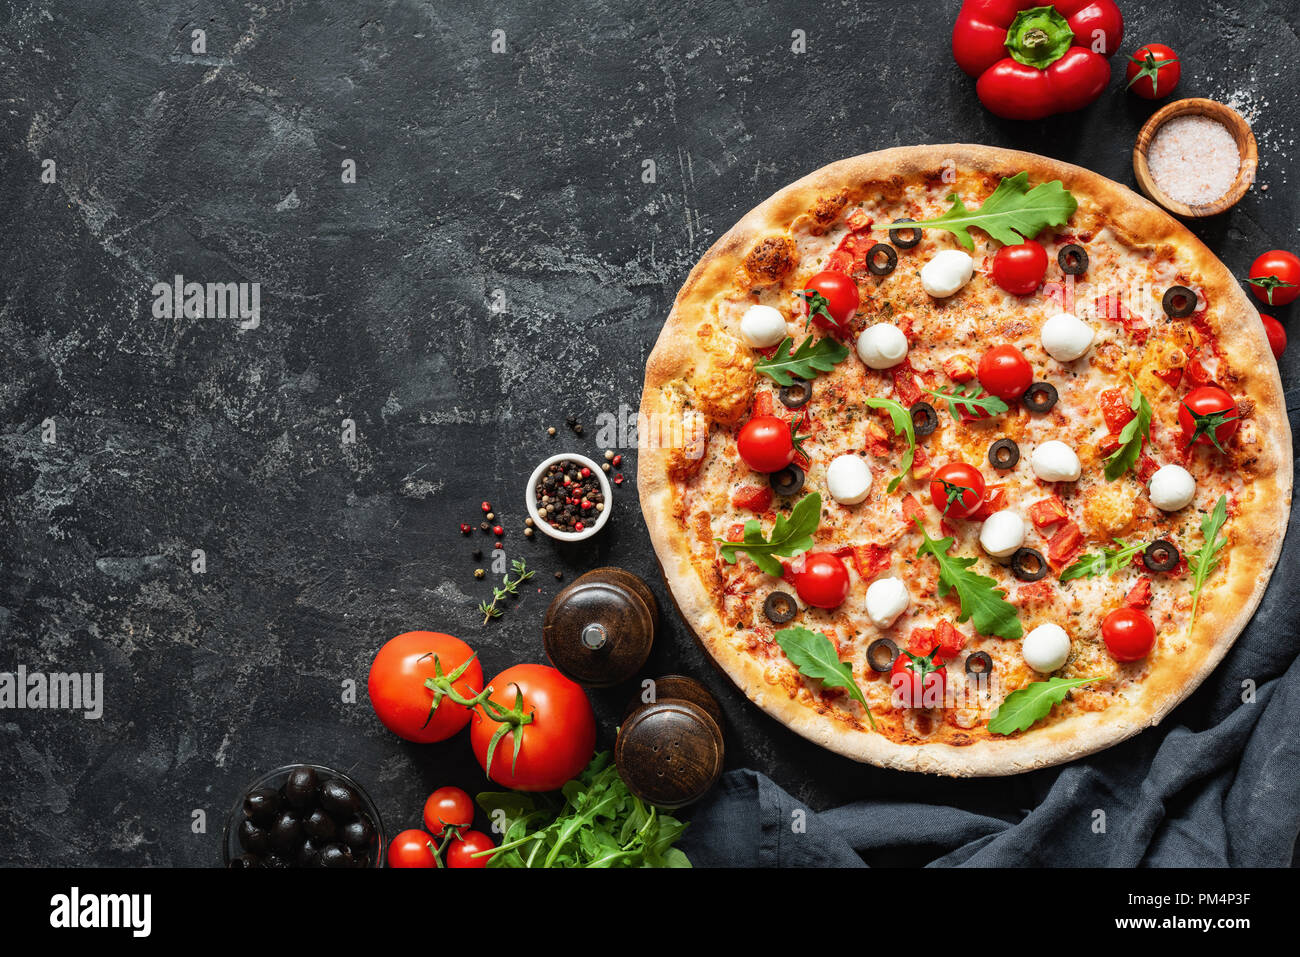 Italian Pizza On Black Concrete Background. Copy Space For Text. Tasty Pizza Stock Photo